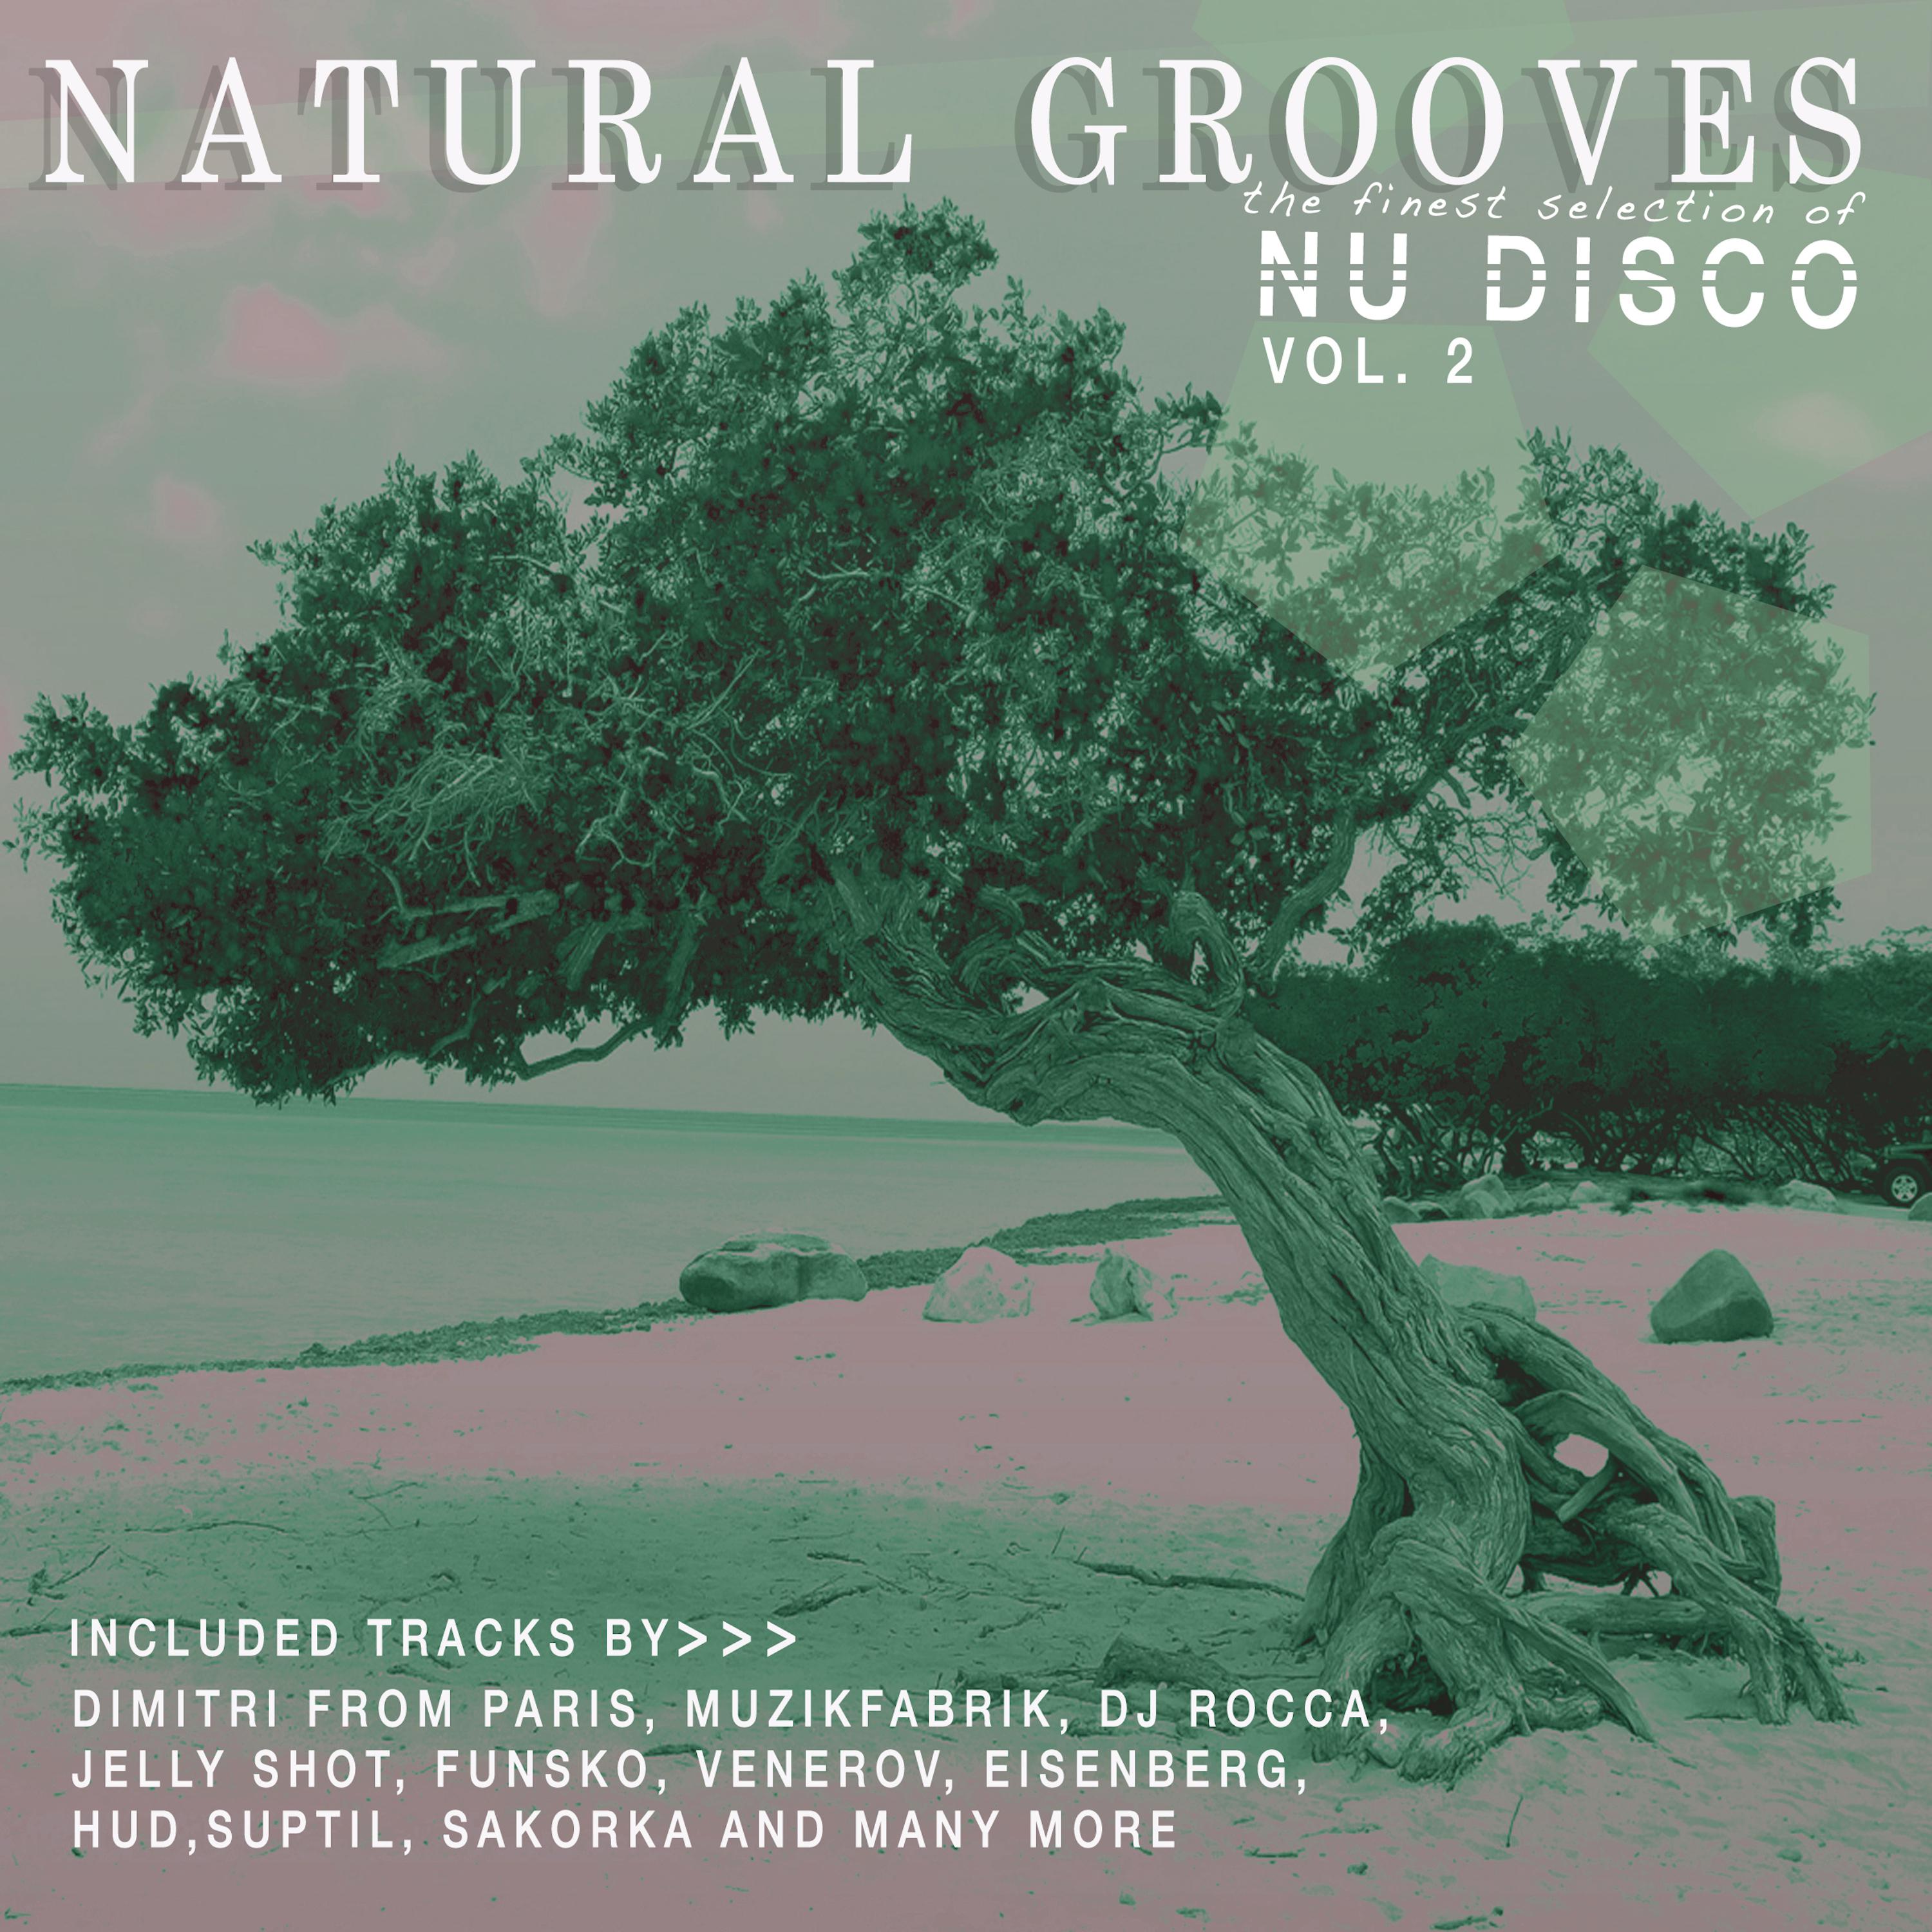 Natural Grooves Fines Selection of NU DISCO, Vol. 2